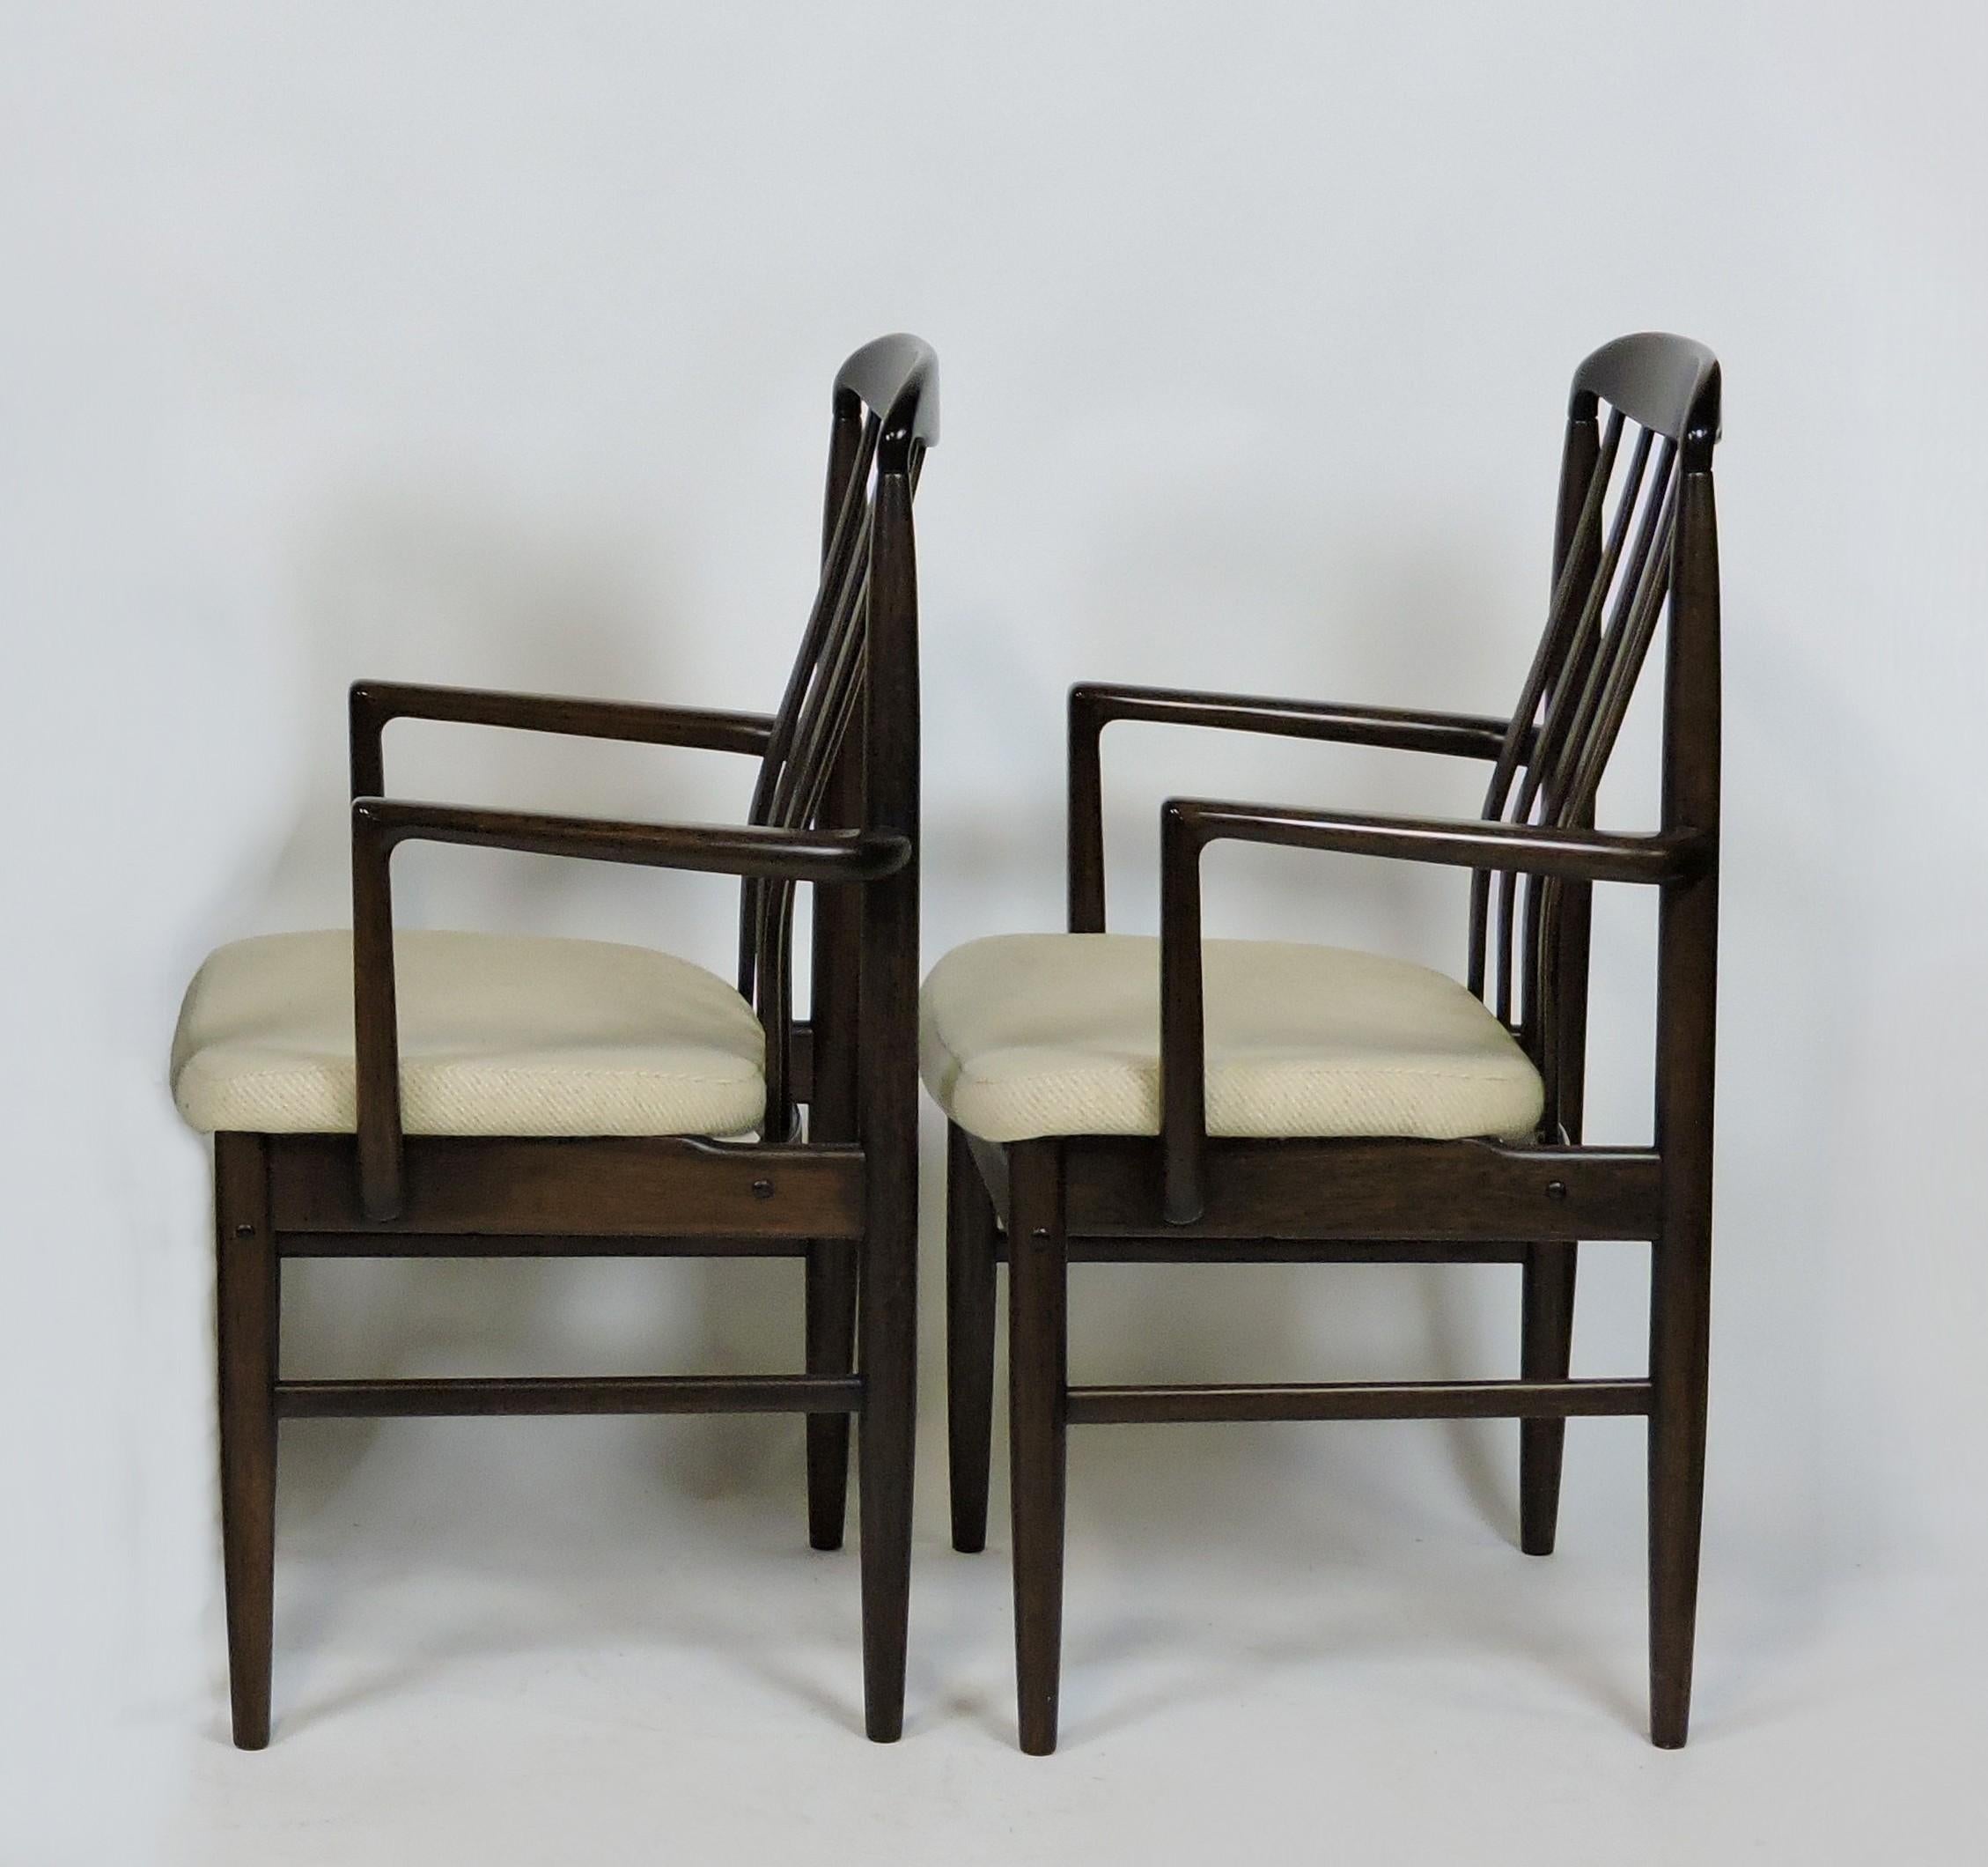 Set of two BL10A Sanne armchairs designed by Danish designer Benny Linden. These chairs are made of solid walnut with contoured spindle backs and upholstered seats in the original oatmeal colored fabric. Very comfortable chairs with a graceful look.